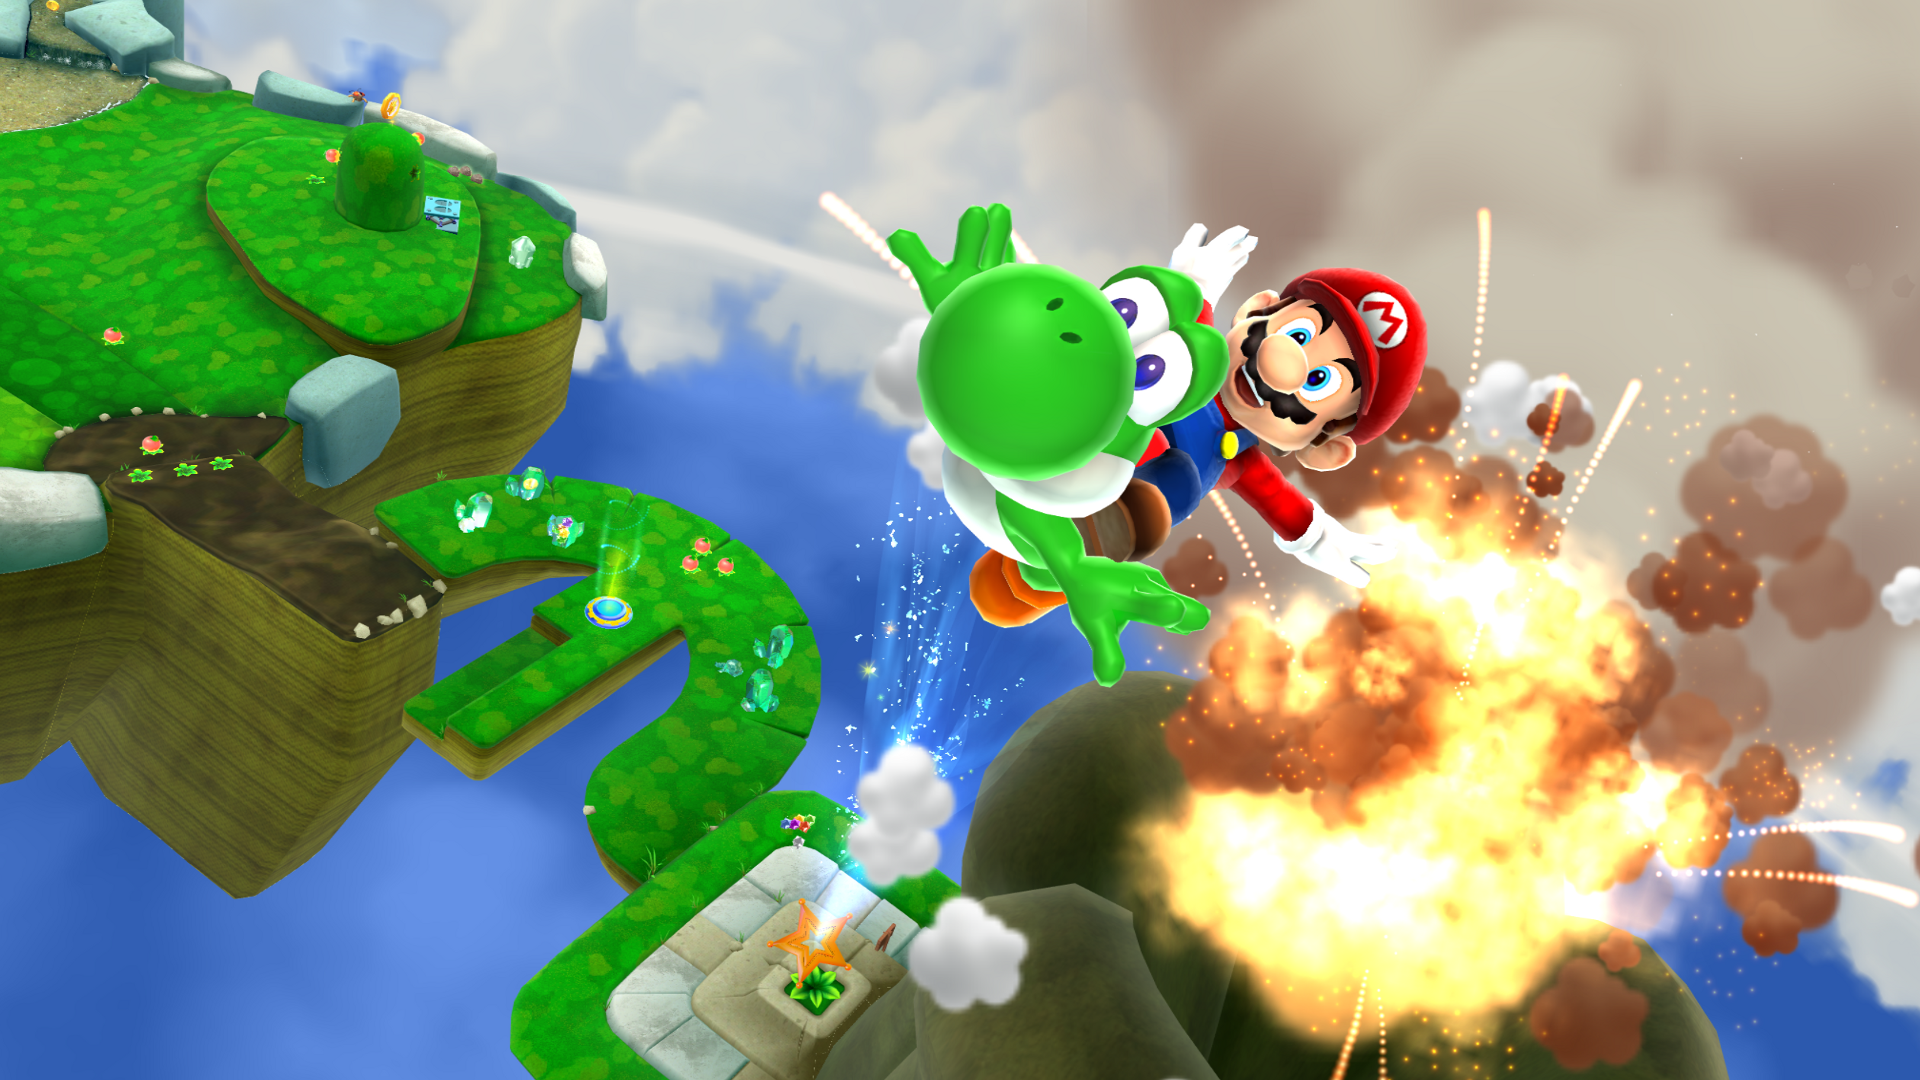 Amazing Super Mario Galaxy 2 Pictures & Backgrounds